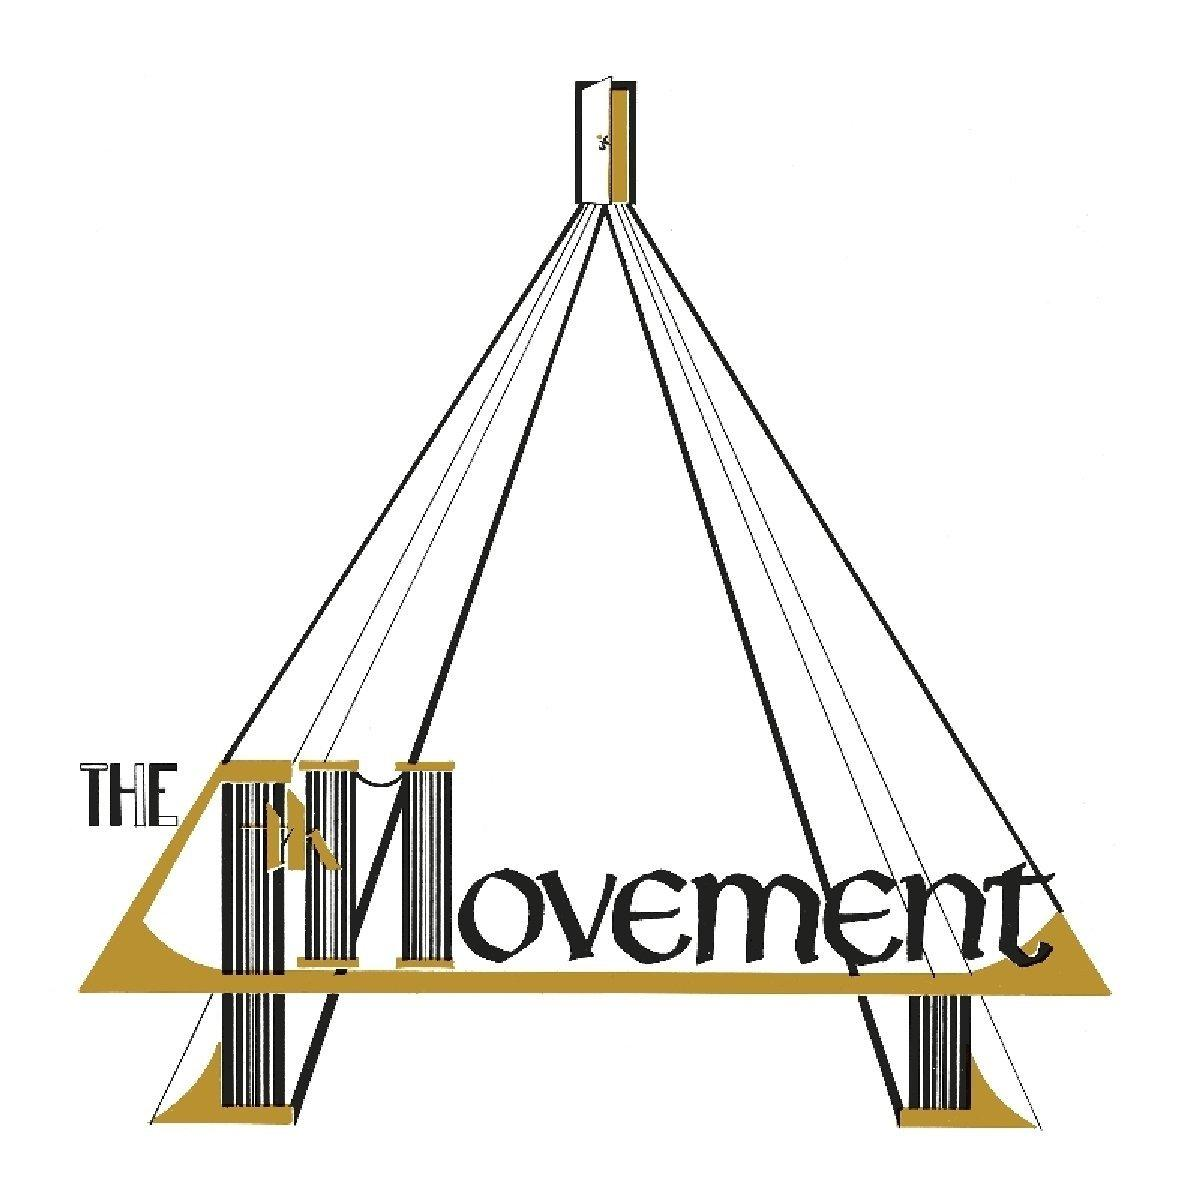 Fourth 4th - Movement - Movement (CD) The